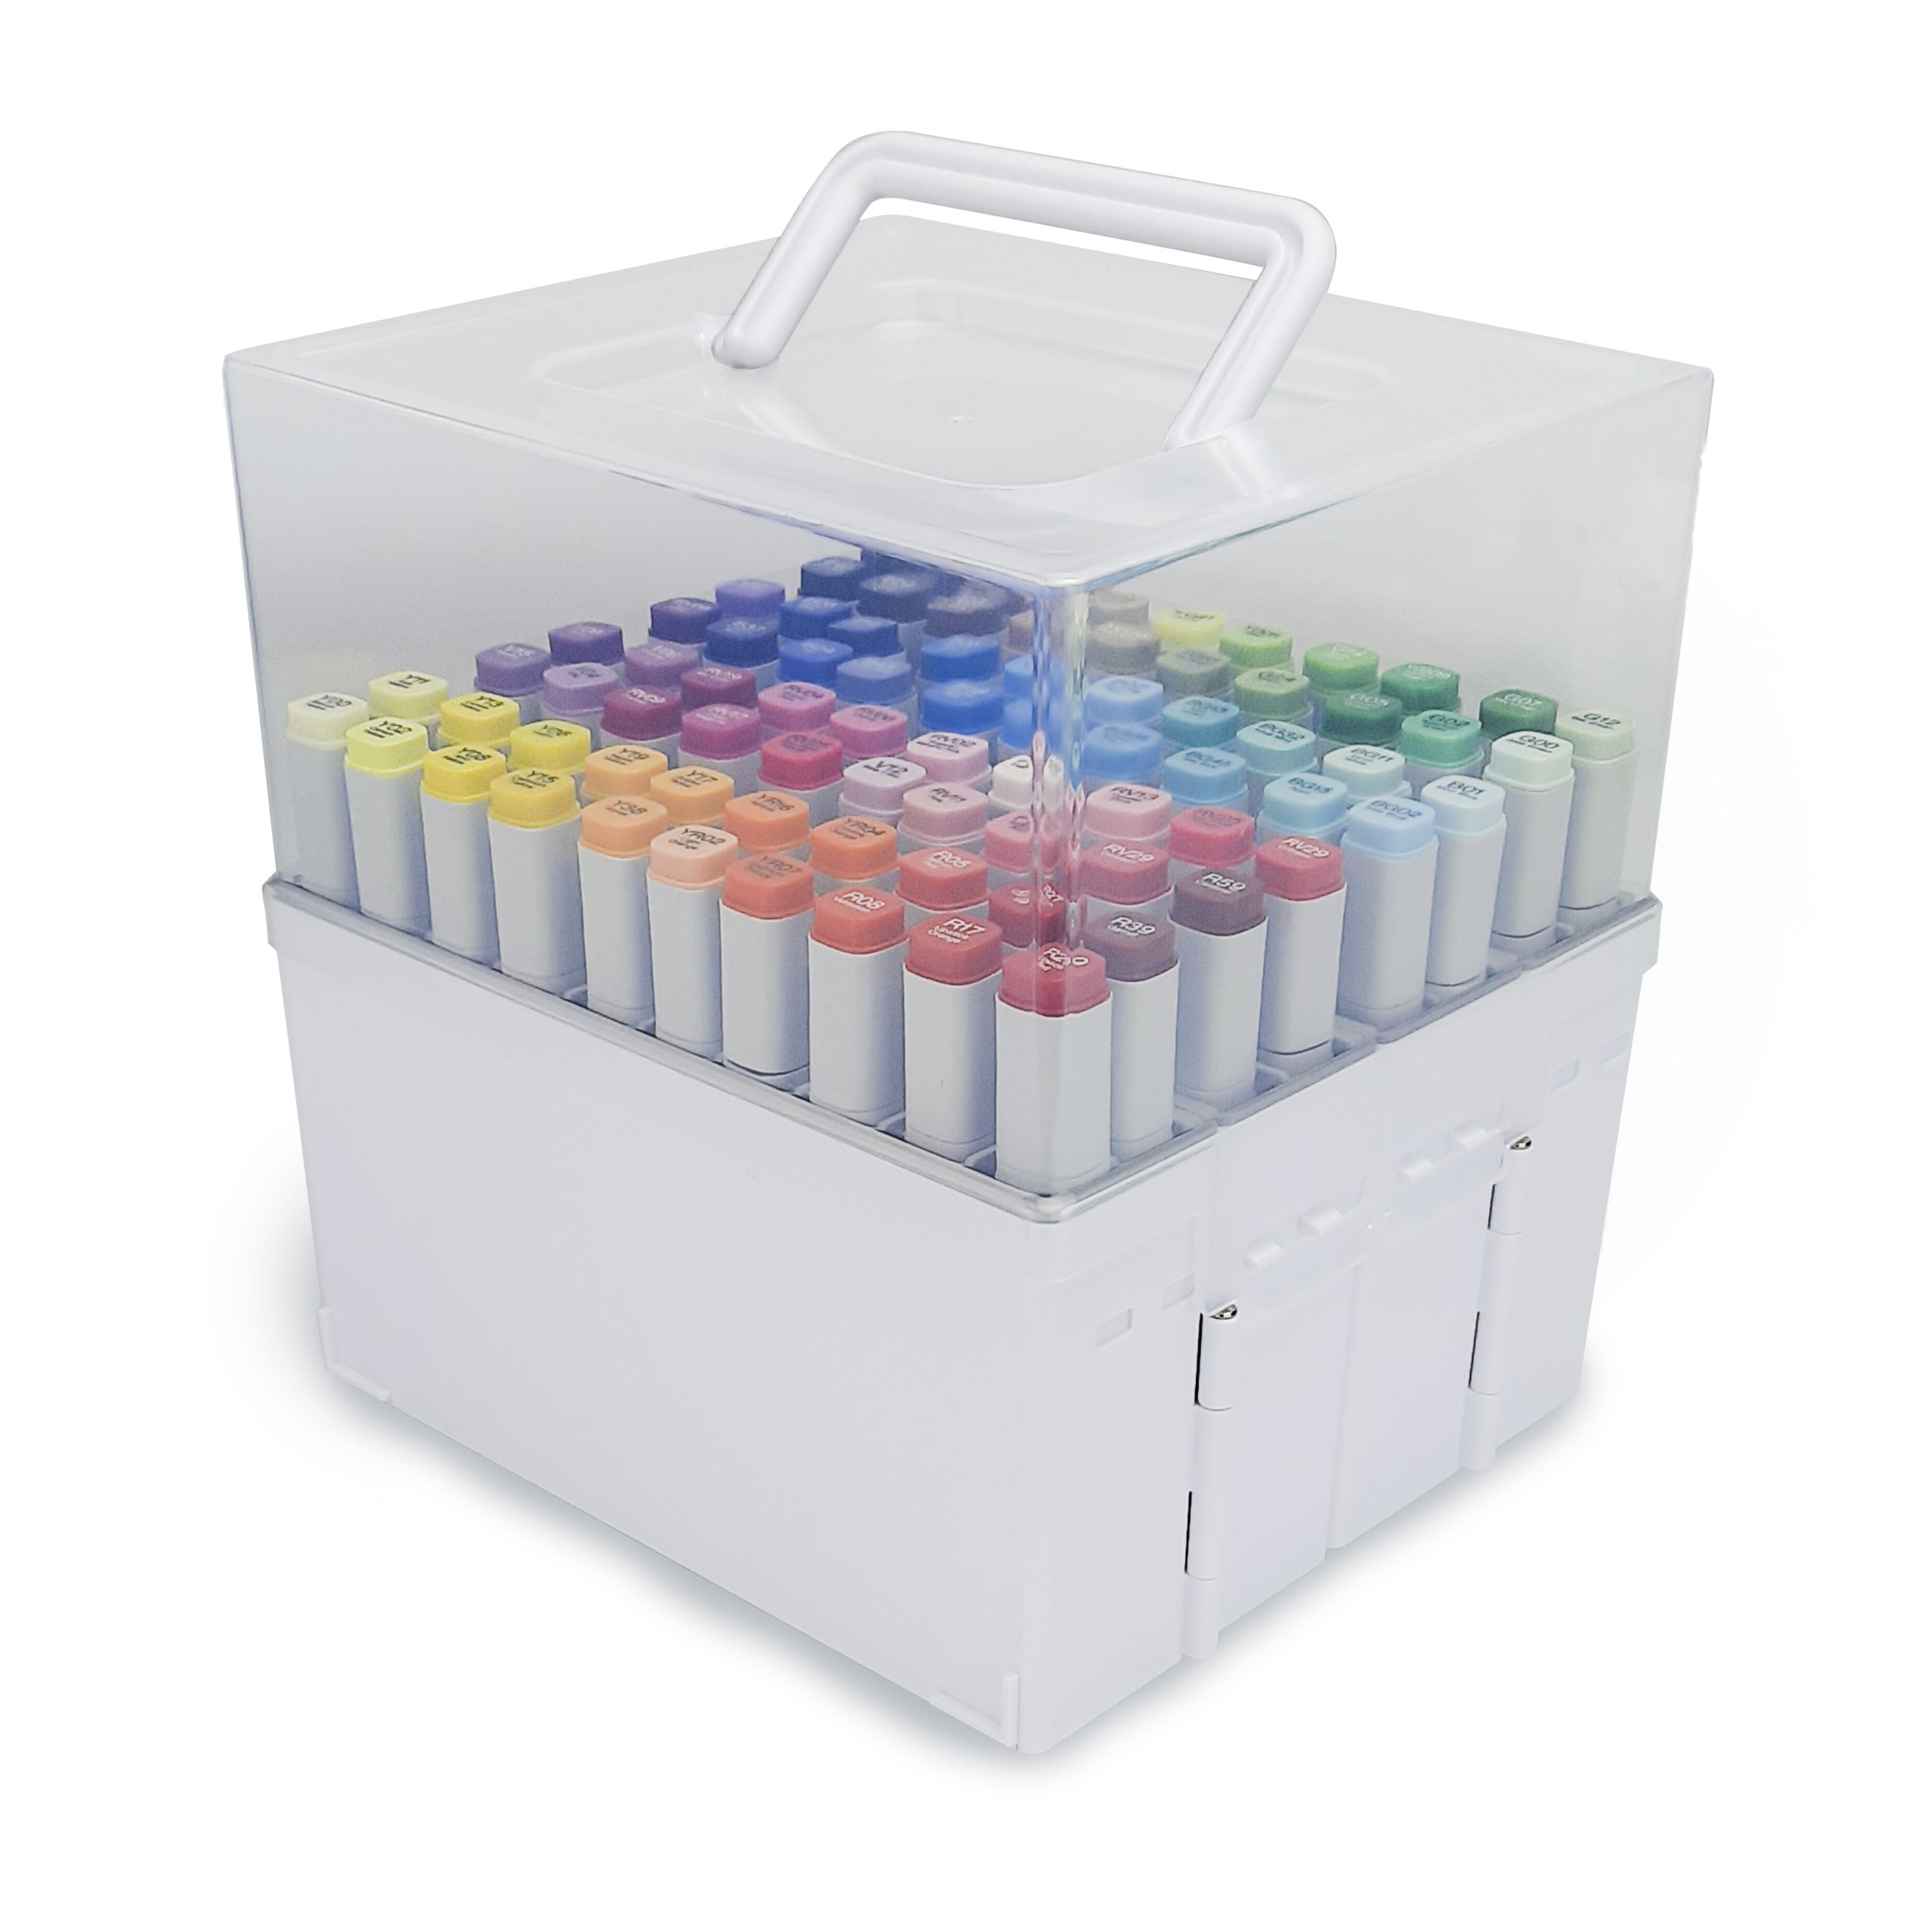 Accordion organizer for markers